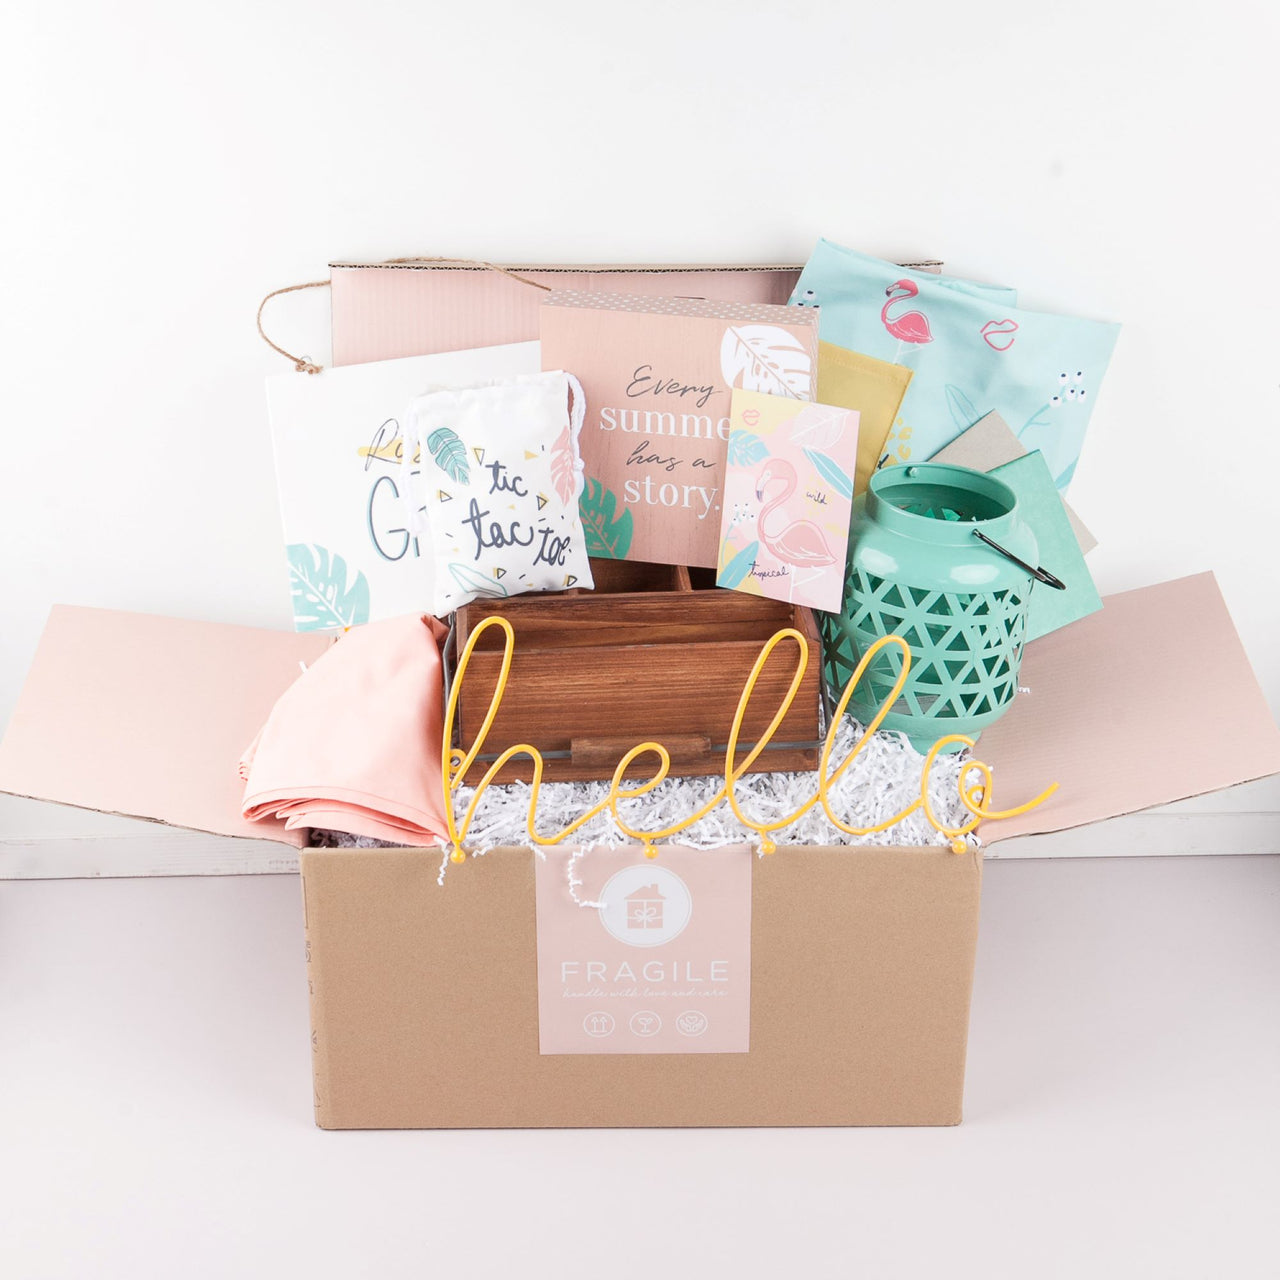 Decocrated Summer 2019 Box